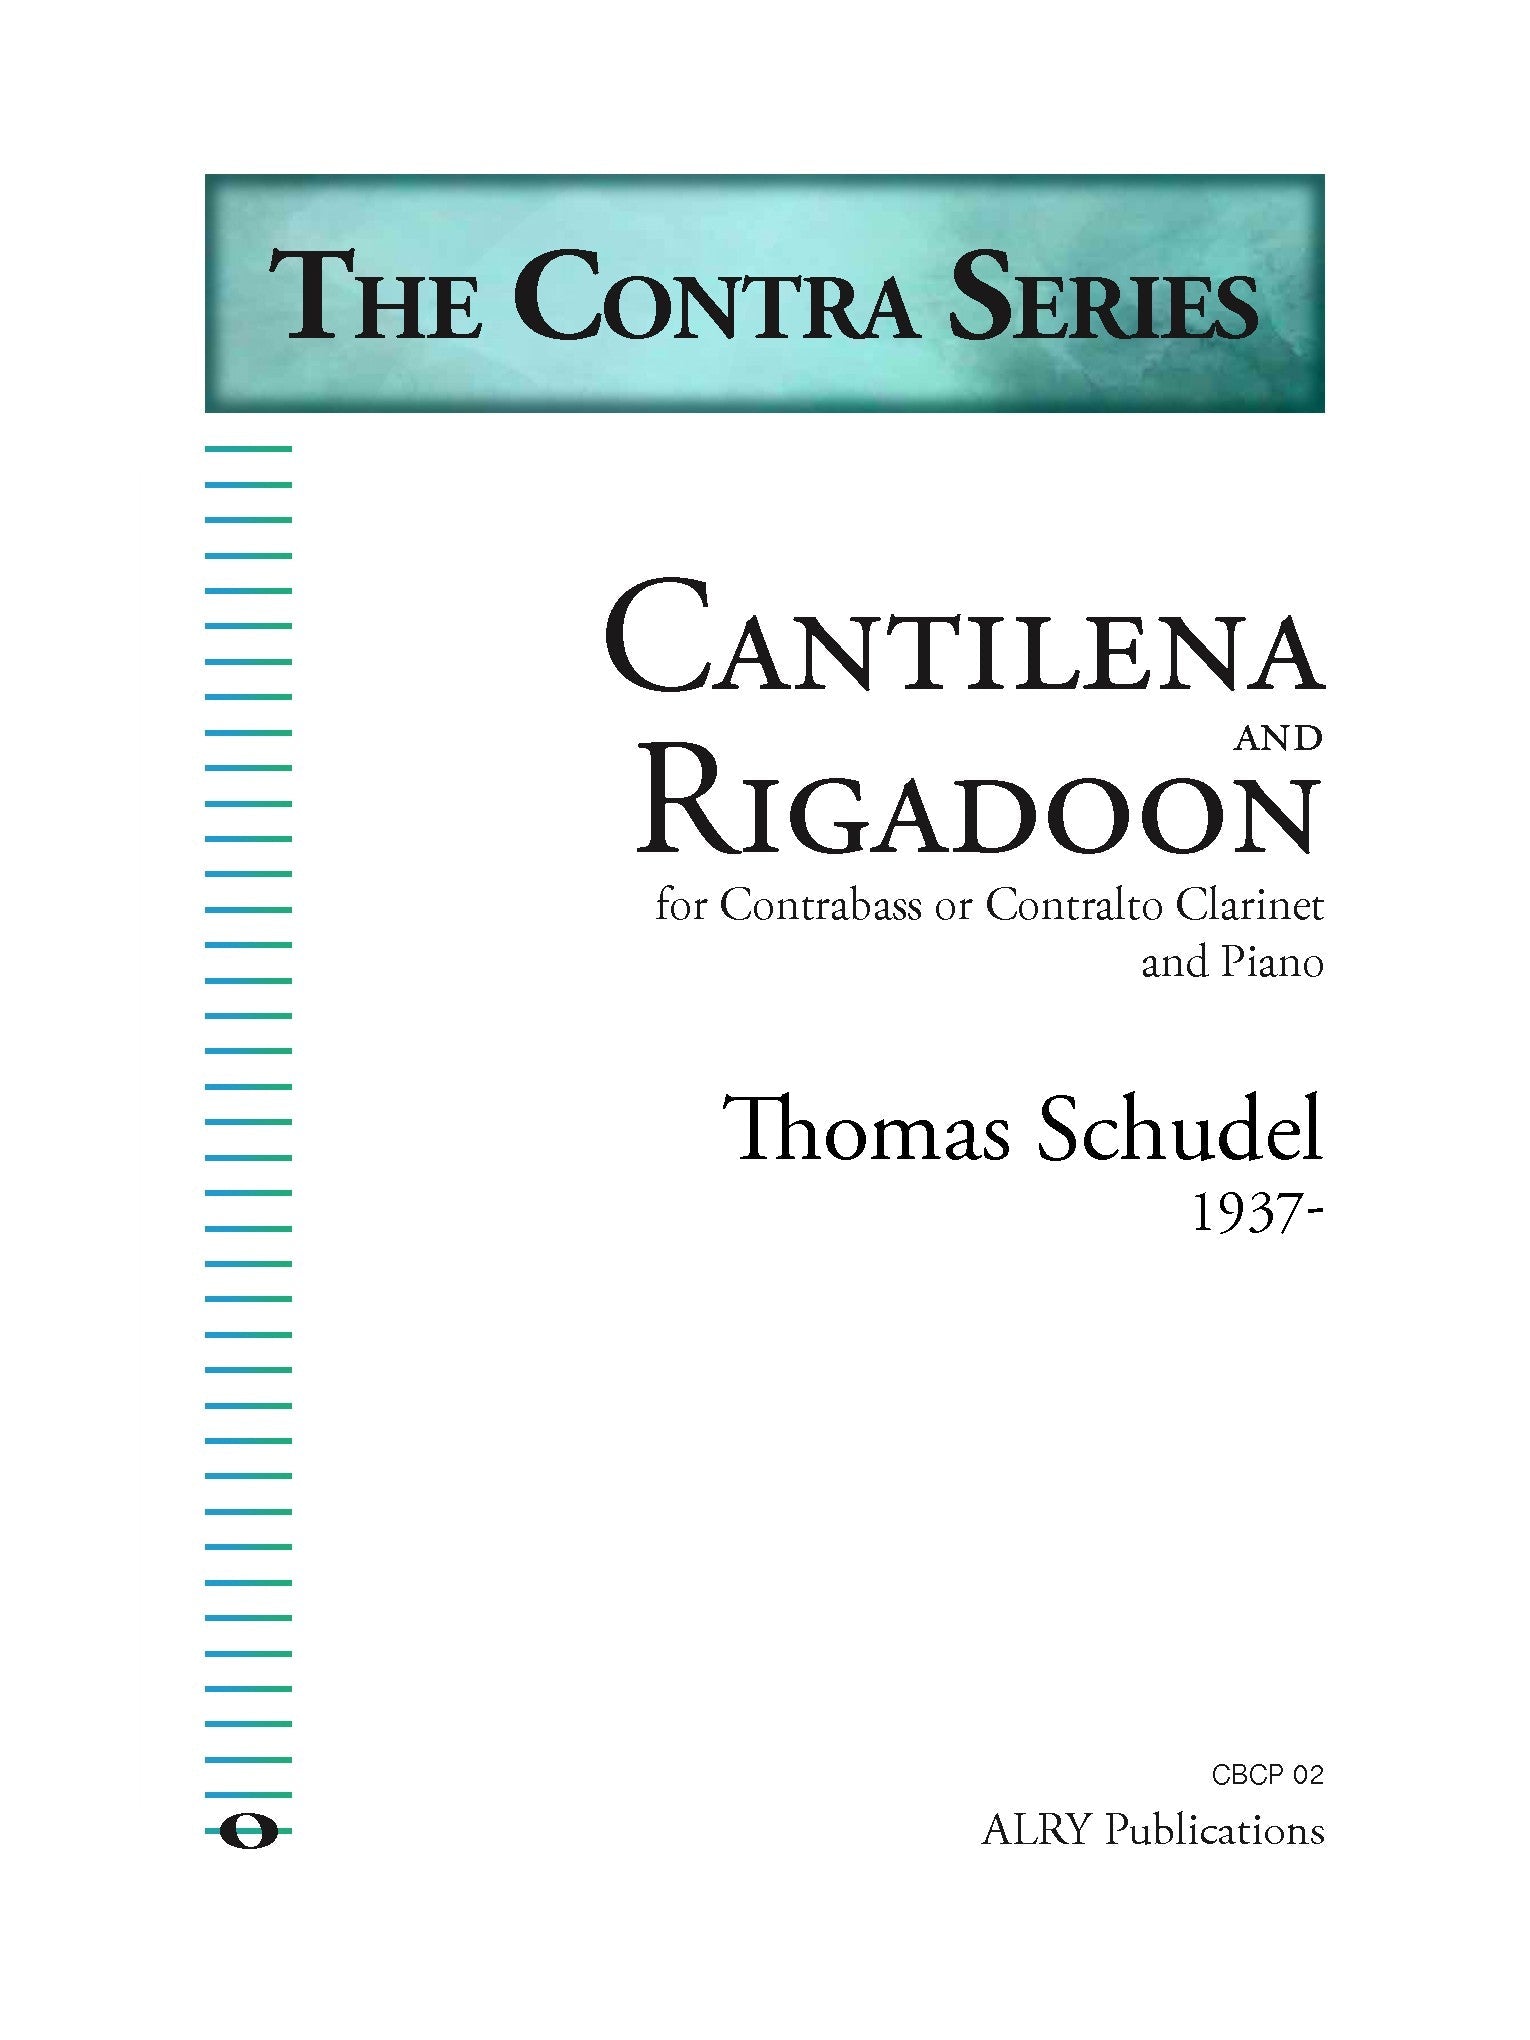 Schudel - Cantilena and Rigadoon for Contra Clarinet and Piano